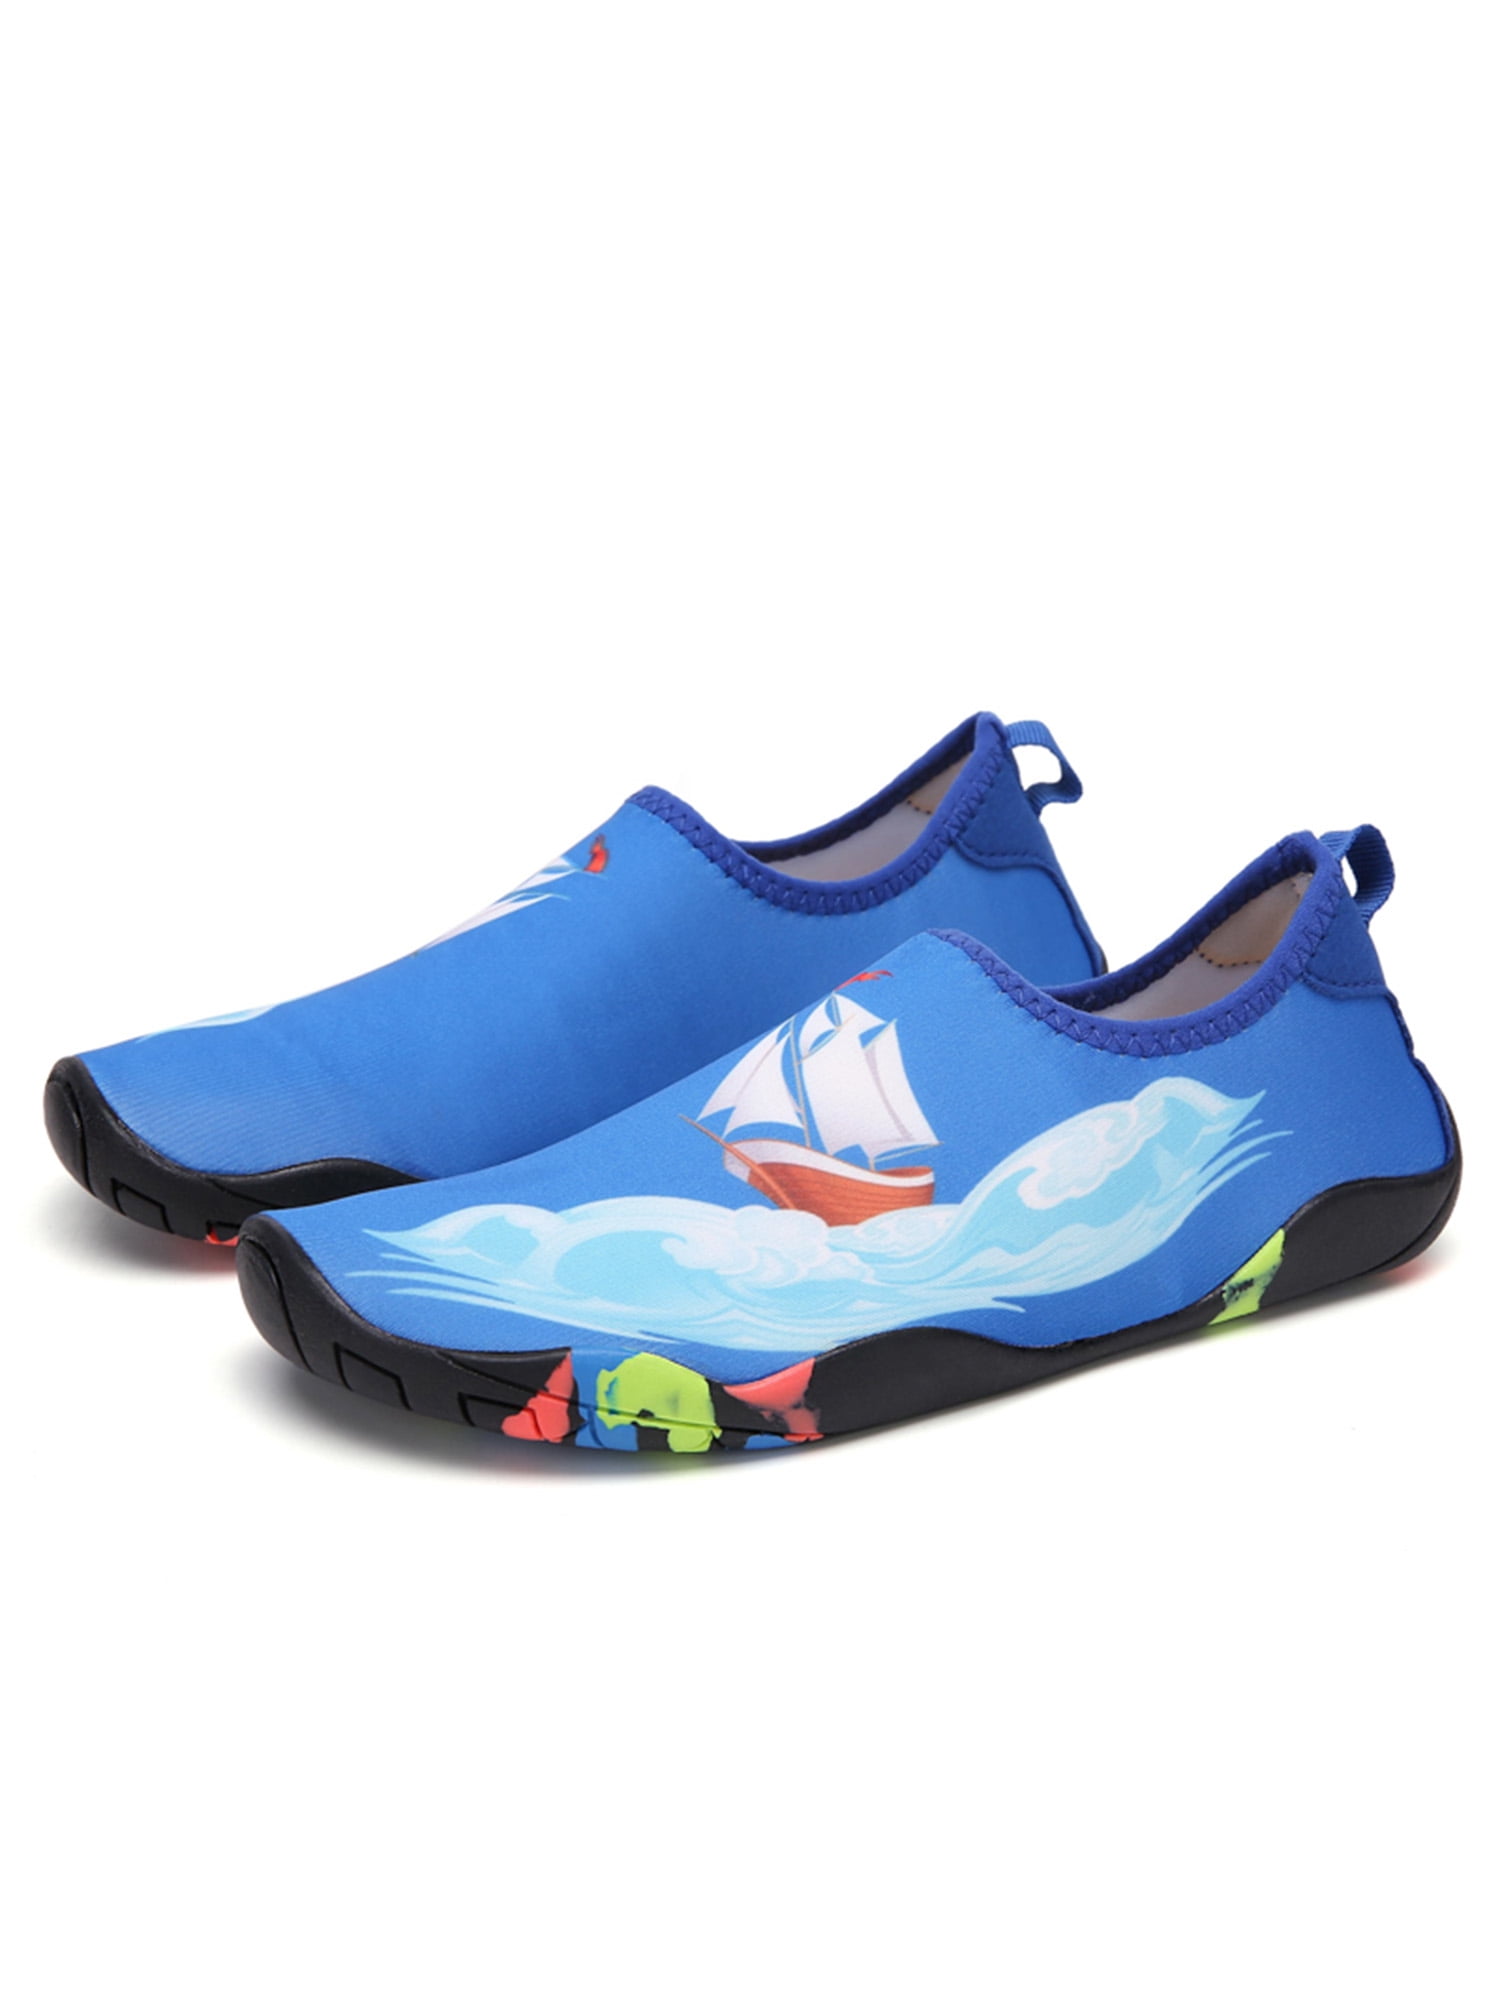 CIOR Boys Girls Quick Dry Water Shoes Lightweight Slip-on Sneakers for Beach Walking Running